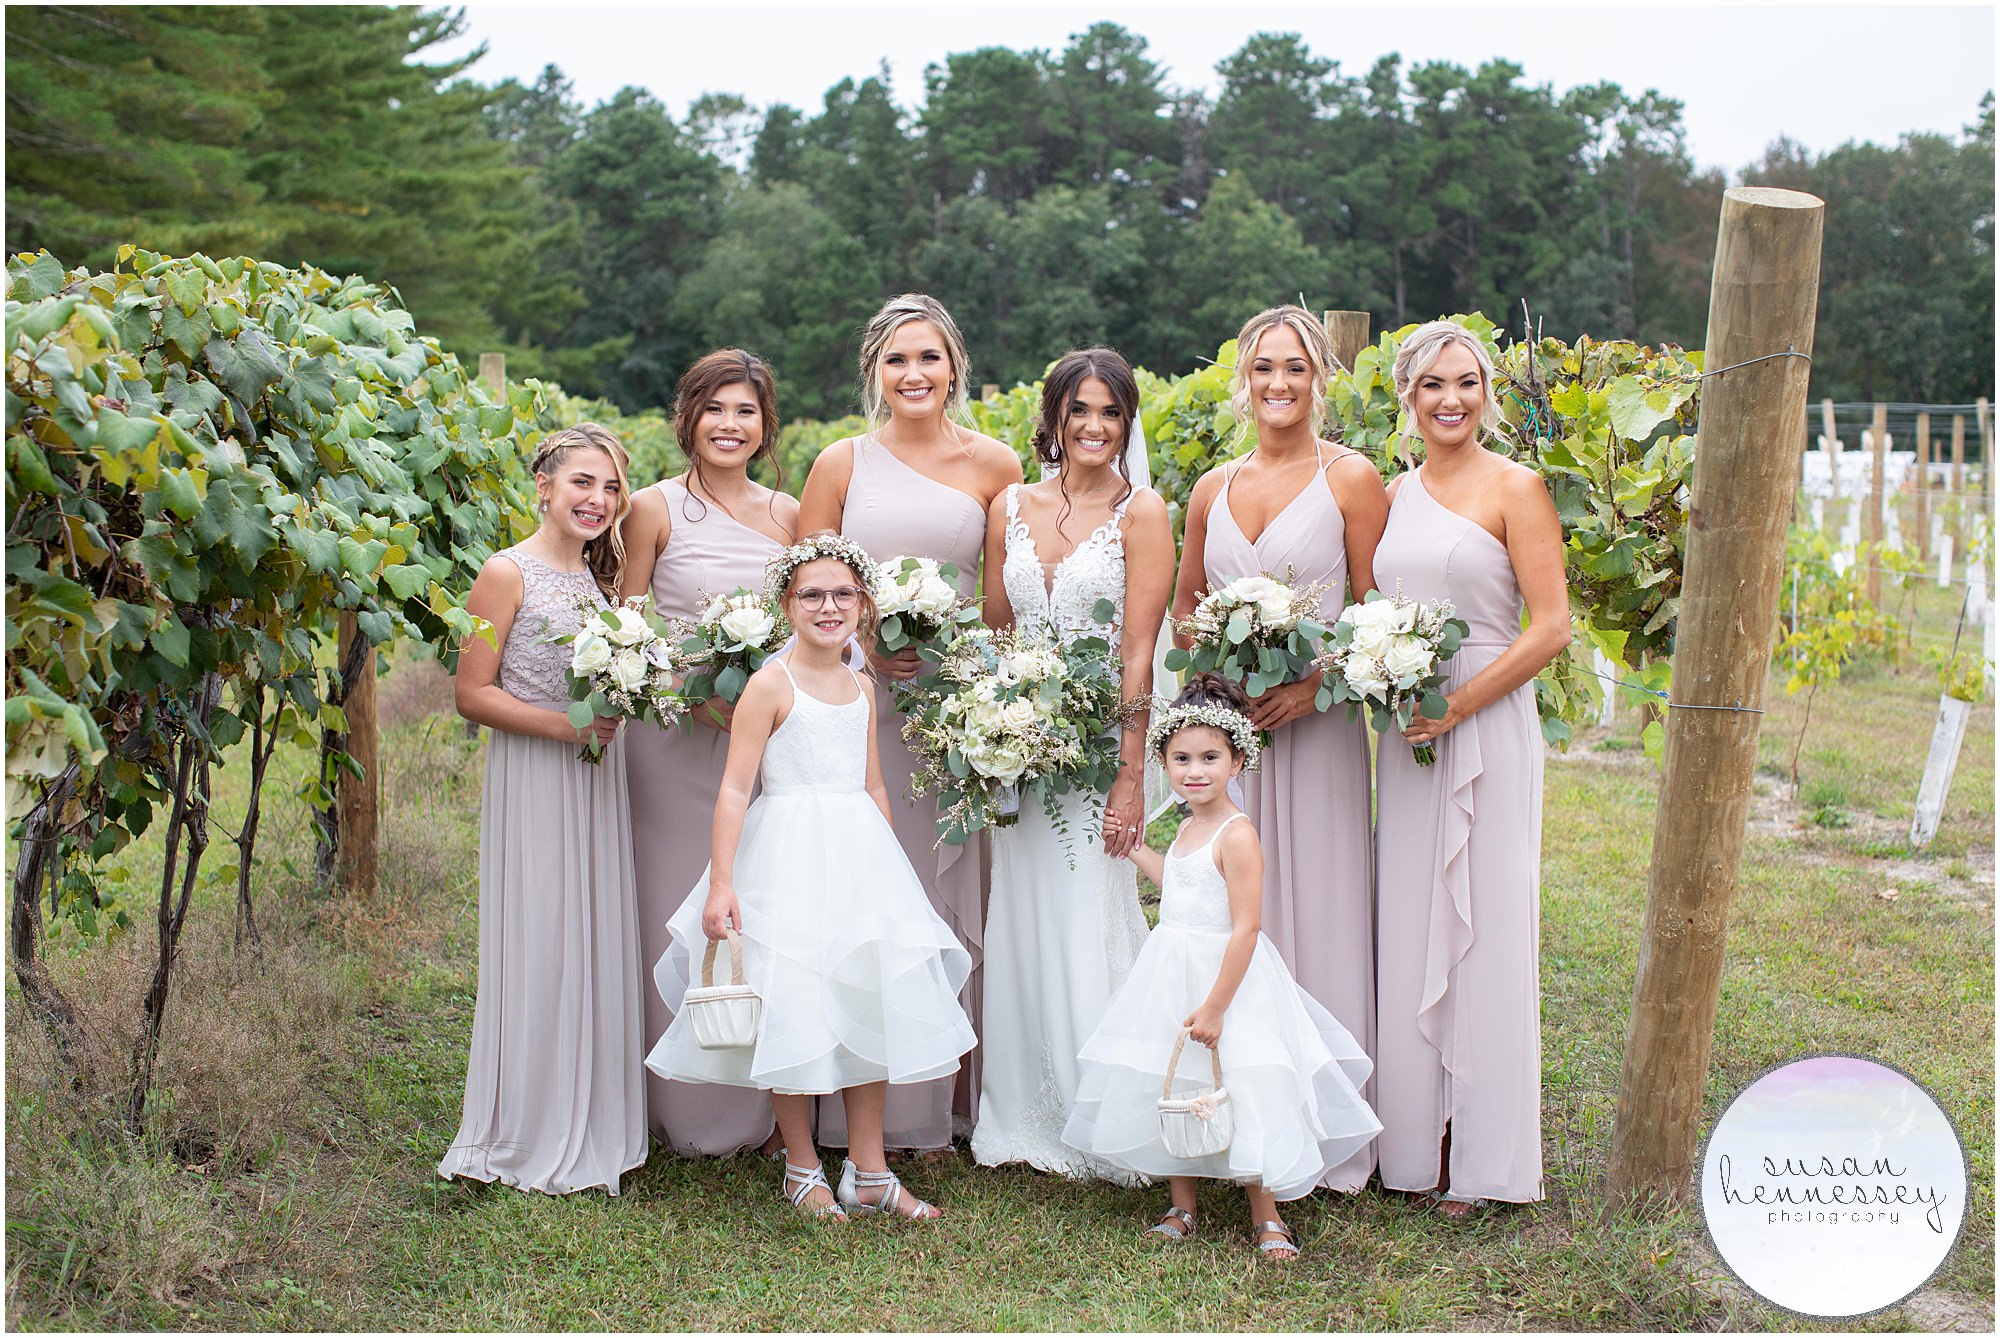 Bride, bridesmaids and flower girls at Renault Winery wedding